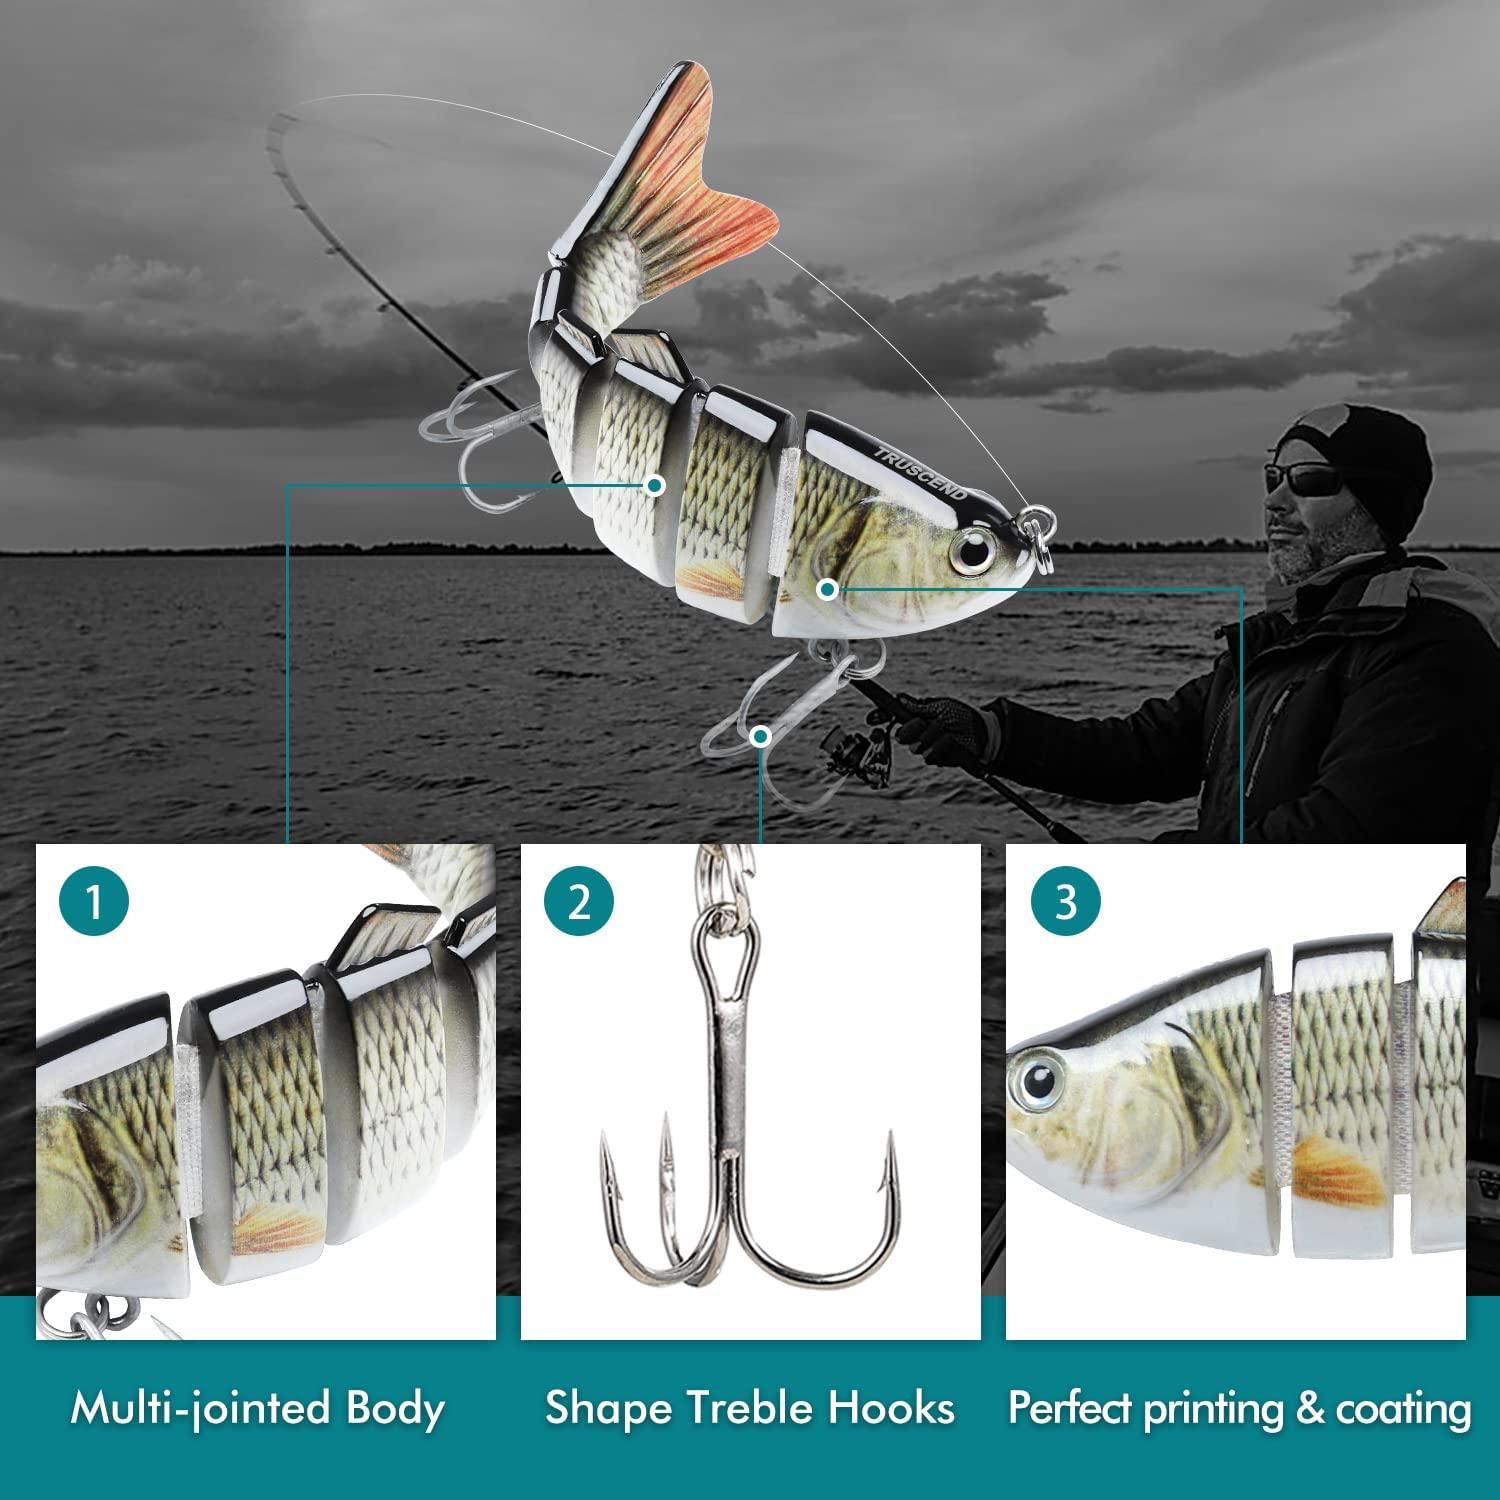 TRUSCEND Pencil Fishing Lures with VMCBKK Hooks 2 in 1 Pencil Plopper  Floating Pencil Popper Dog Walker for Freshwater and Saltwater Long-Cast  Topwater Fishing Lures or Quake Sinking Pencil Baits Z-40.7oz